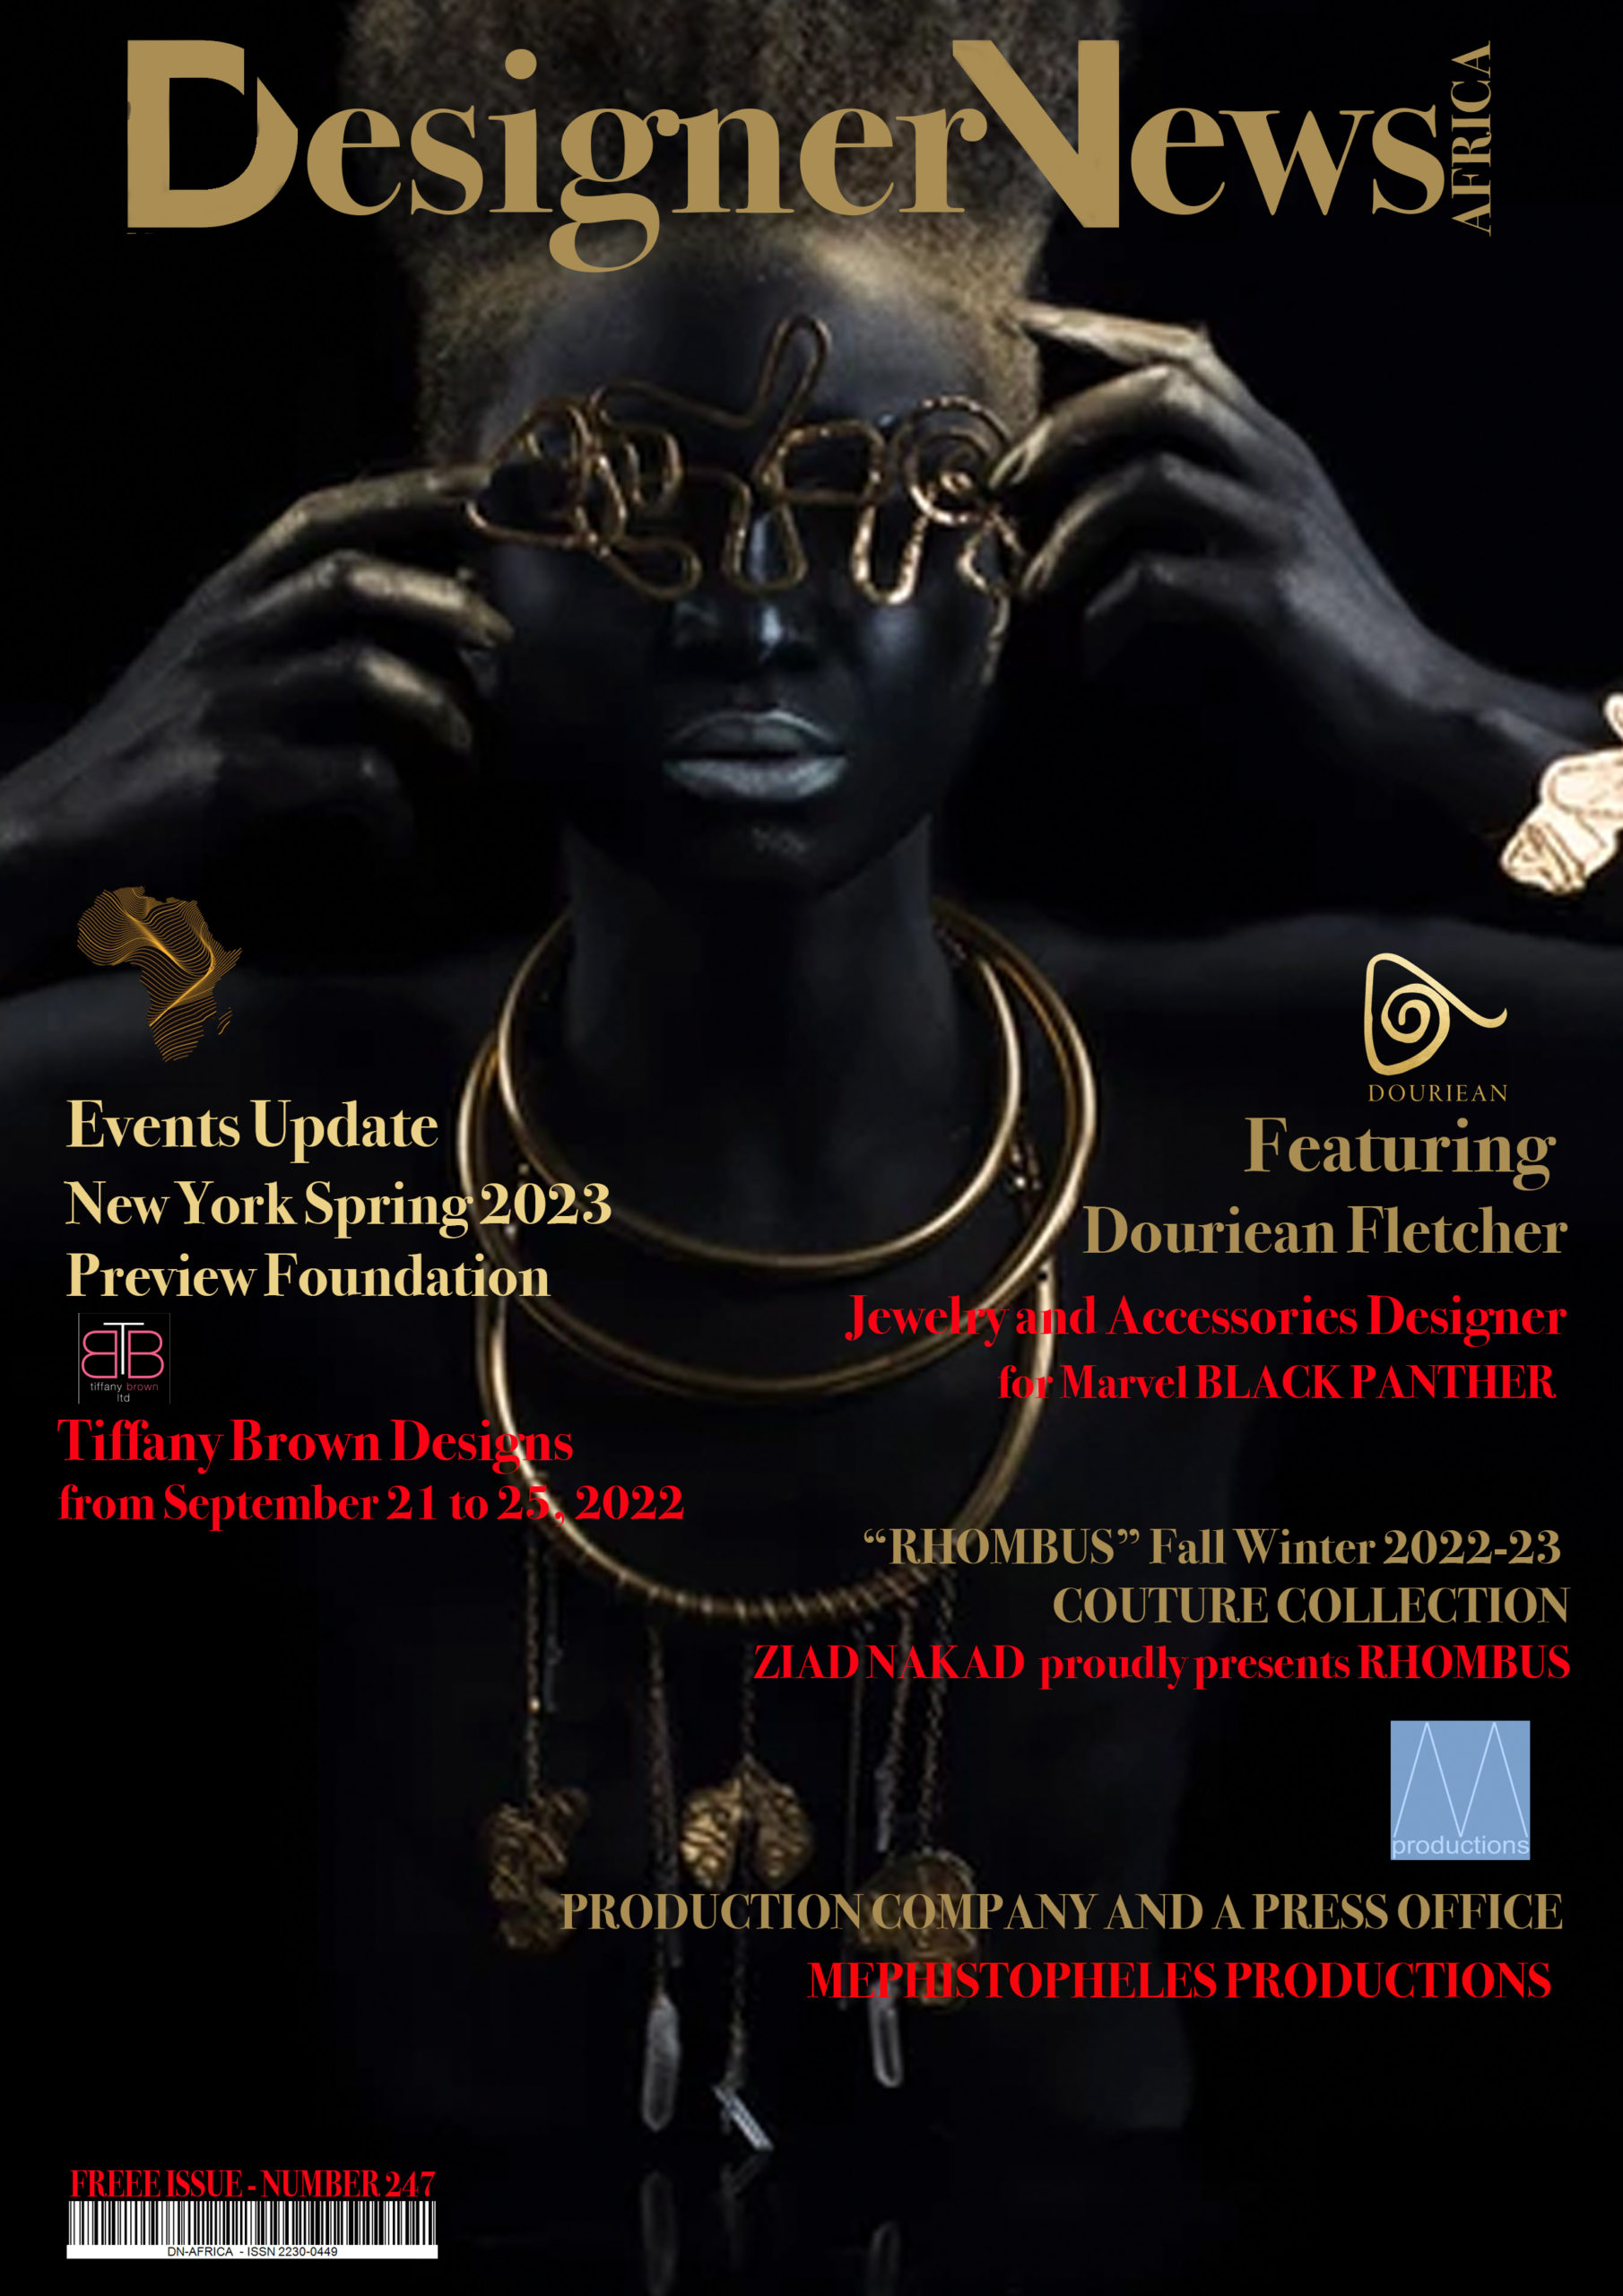 COVER-DN-AFRICA–-COVER-AUG-2022-MAG-–-NUMBER-247-–-Douriean-Fletcher-Jewelry-and-Accessories-Designer-for-Marvel-BLACK-PANTHER-DN-AFRICA-DN-A-INERNATIONAL-Media-Partner-AS-VOGUE-COVER